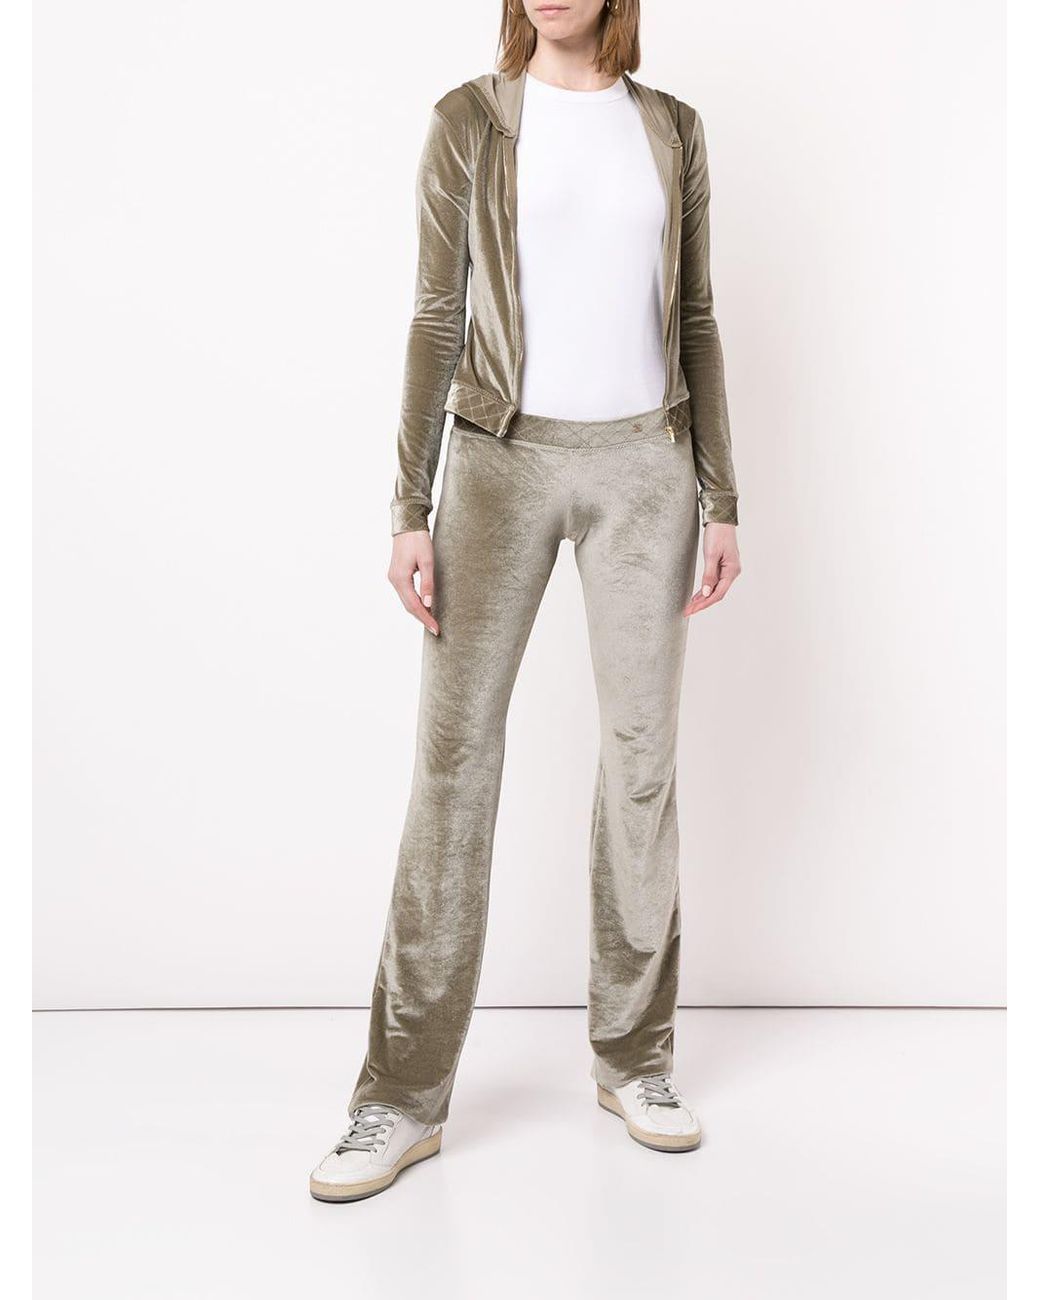 Chanel Pre-Owned Velour Tracksuit Set in Metallic | Lyst